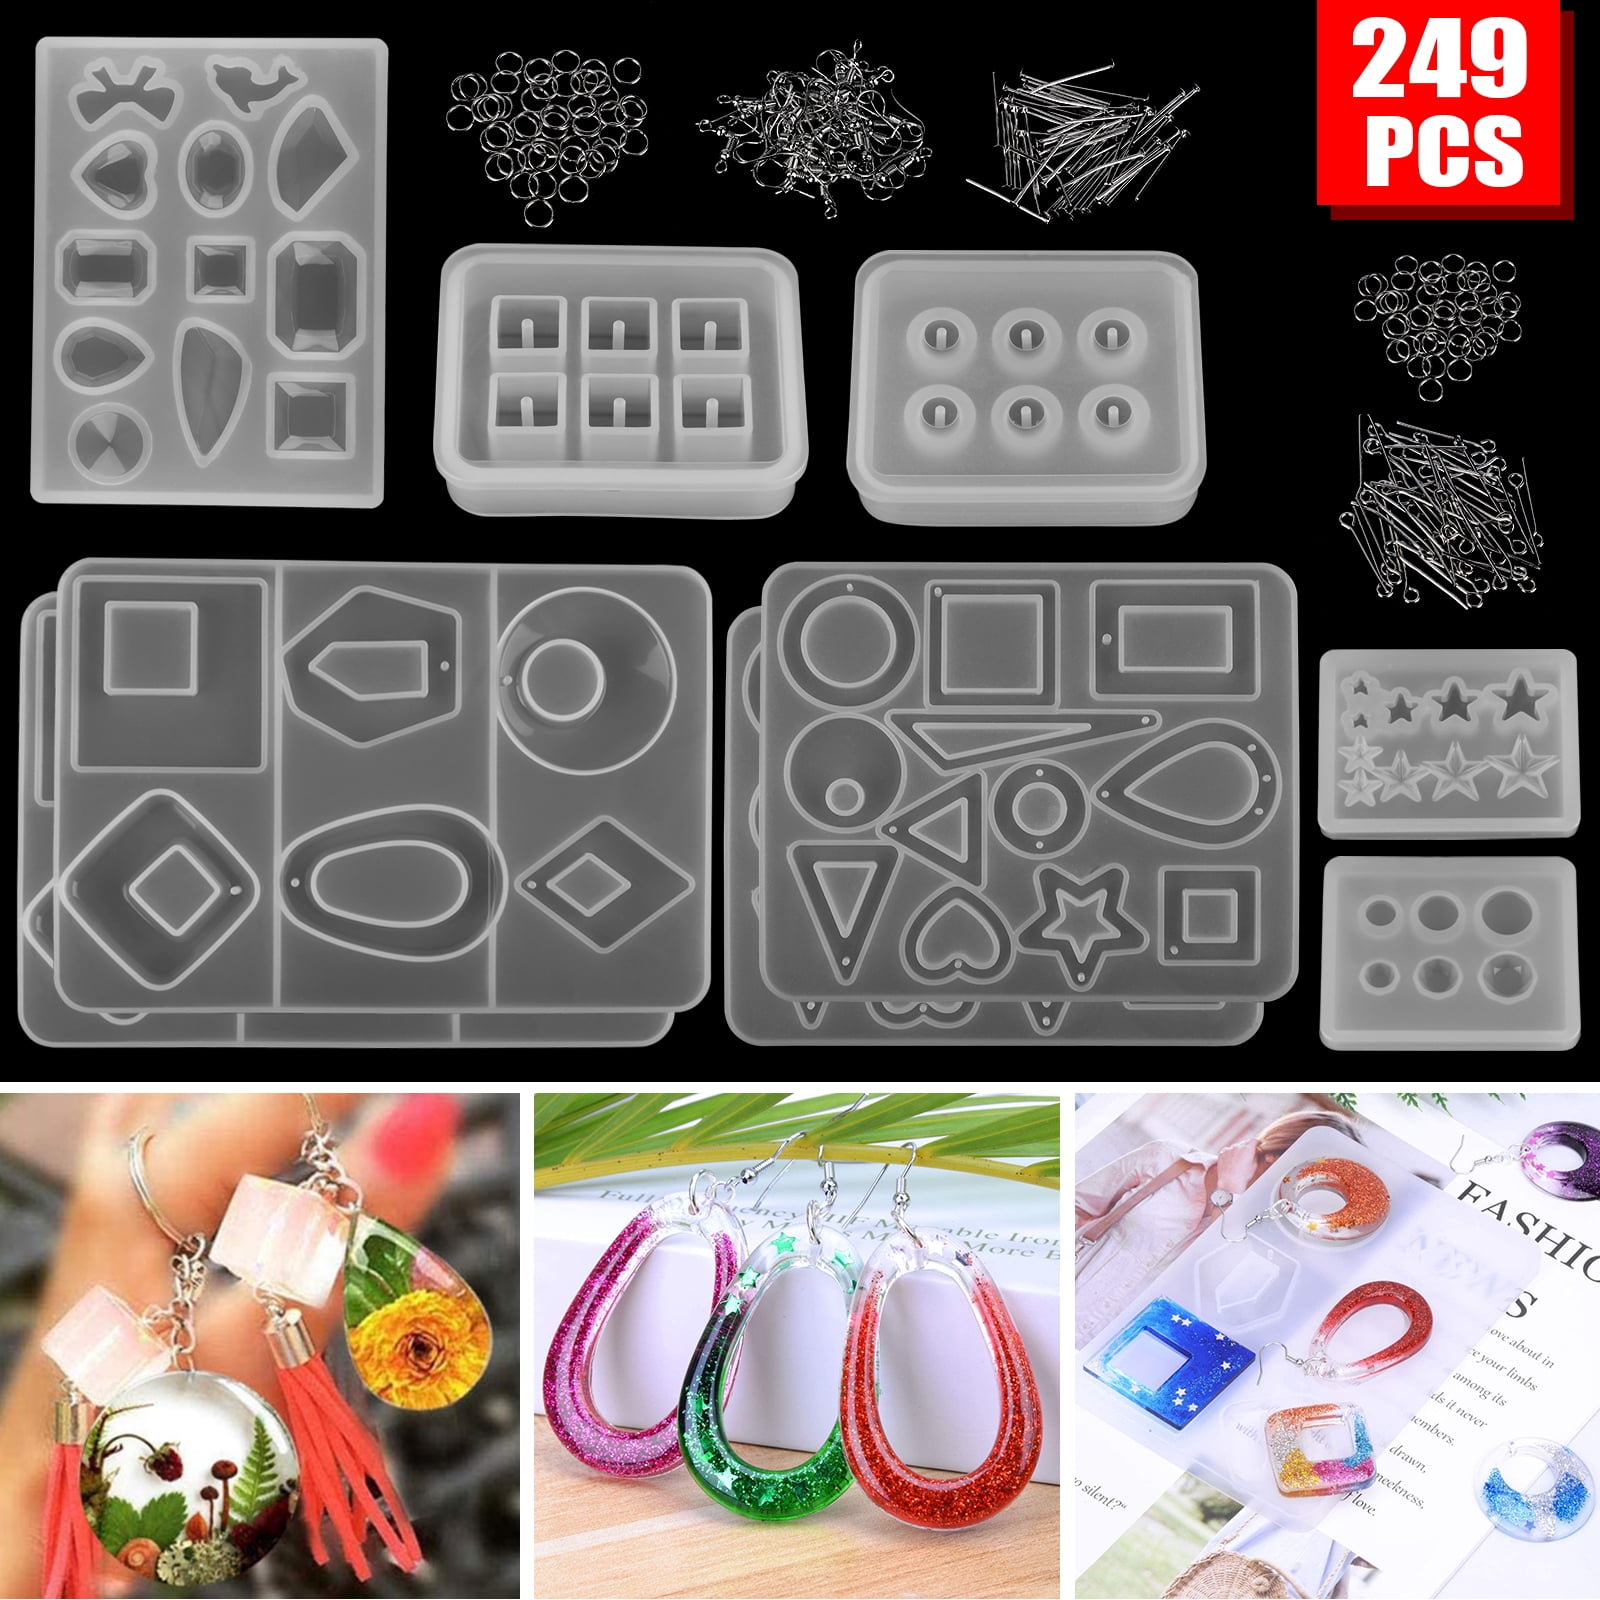 Details about   1 Set Novelty Silicone DIY Jewelry Mold Resin Mould Baking Shape Mould 